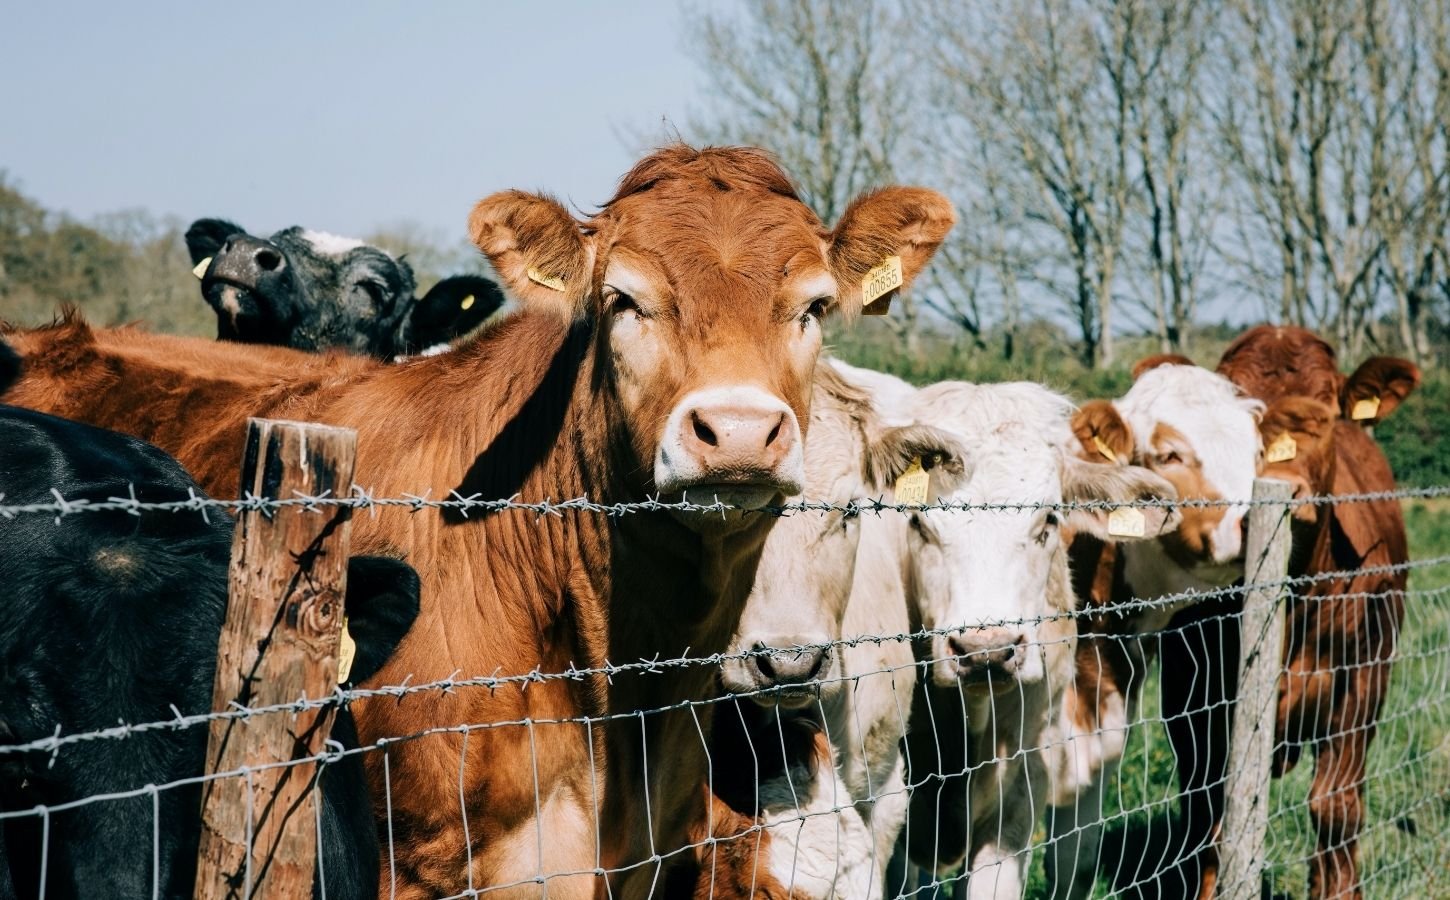 Cows trapped on a farm in England, where livestock farmers have provoked a college to block a student Veganuary initiative